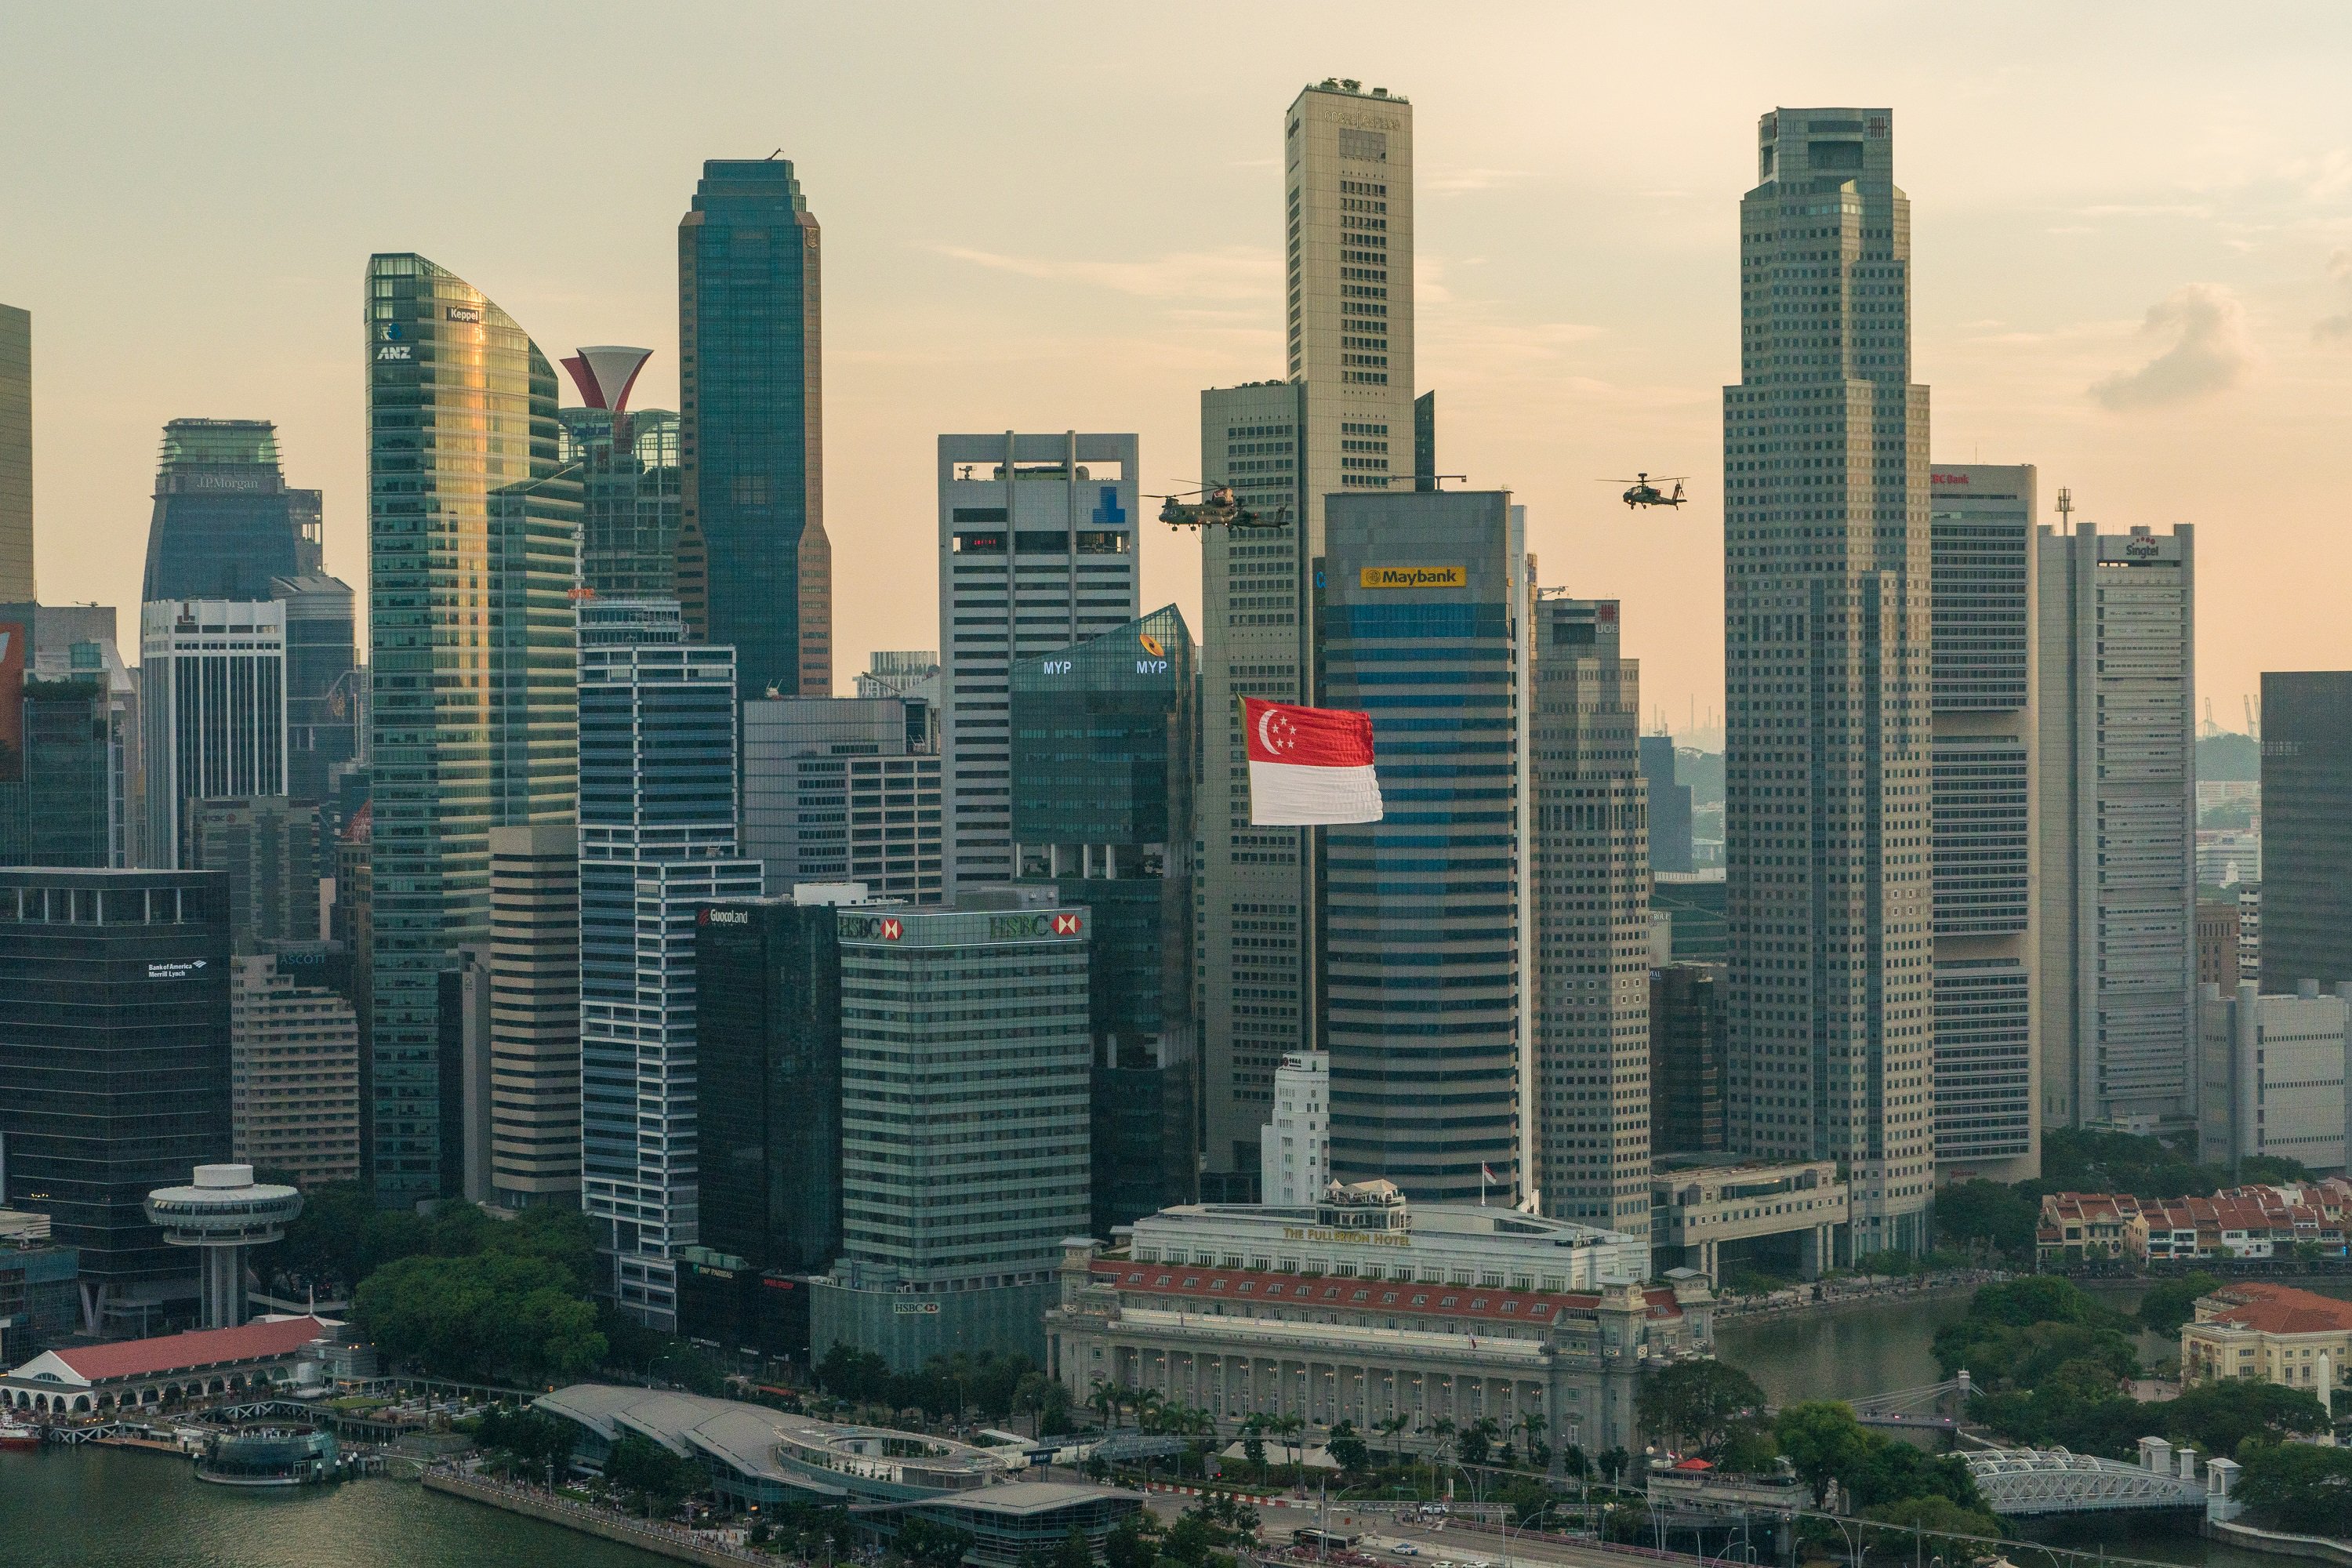 The Ritz-Carlton on Twitter: "#DidYouKnow the red white #Singapore flag features a crescent moon and 5 stars, symbolising a rising nation and our national ideals. / Twitter